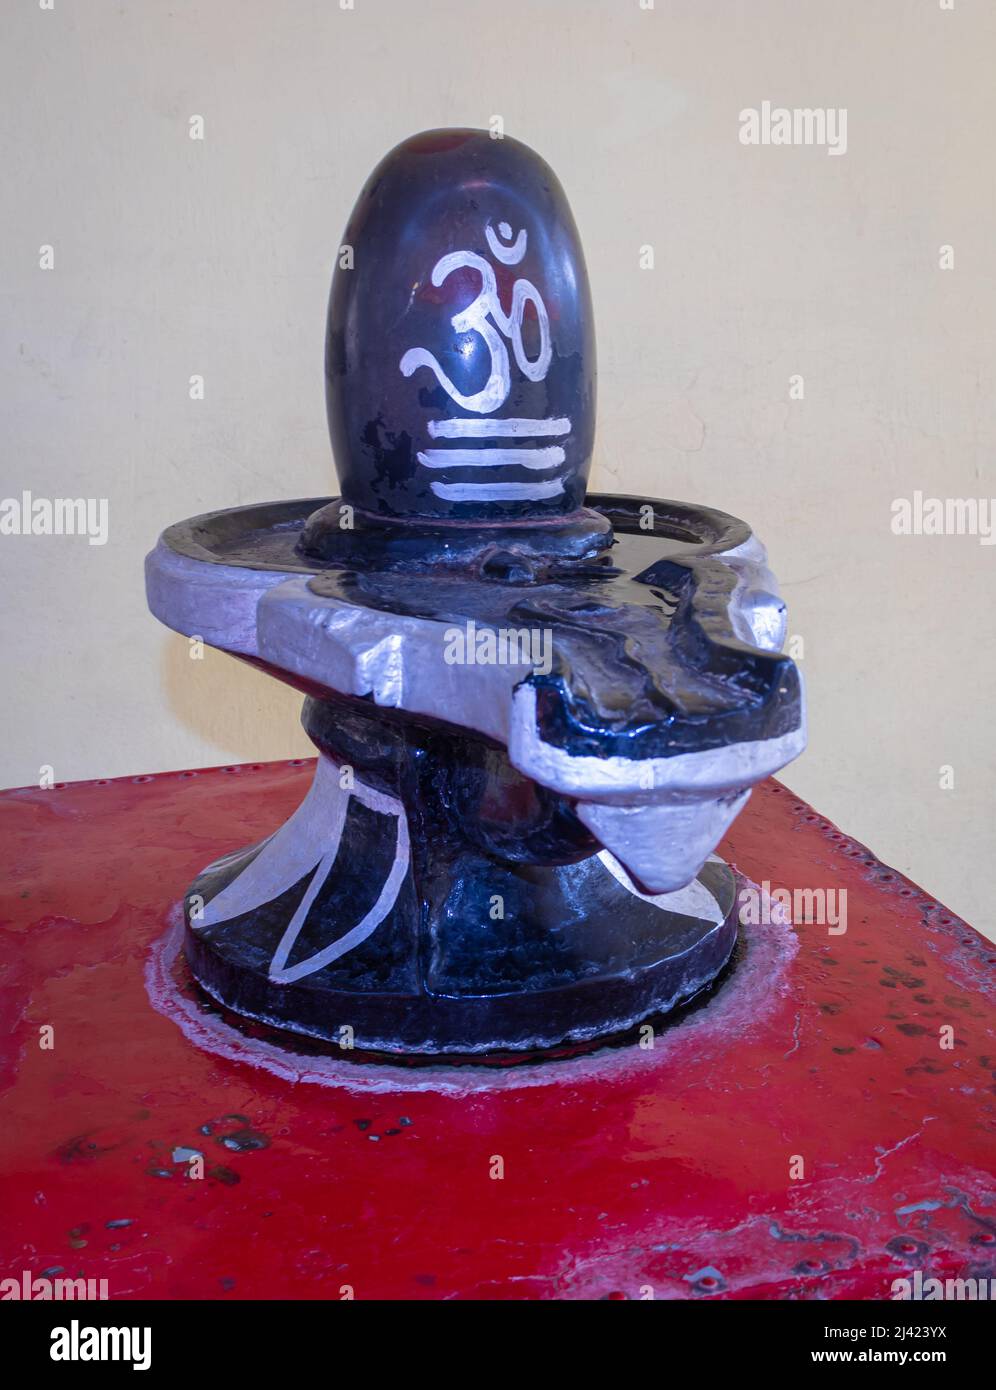 hindu god lord Shiva linga from different angle image is taken at ...